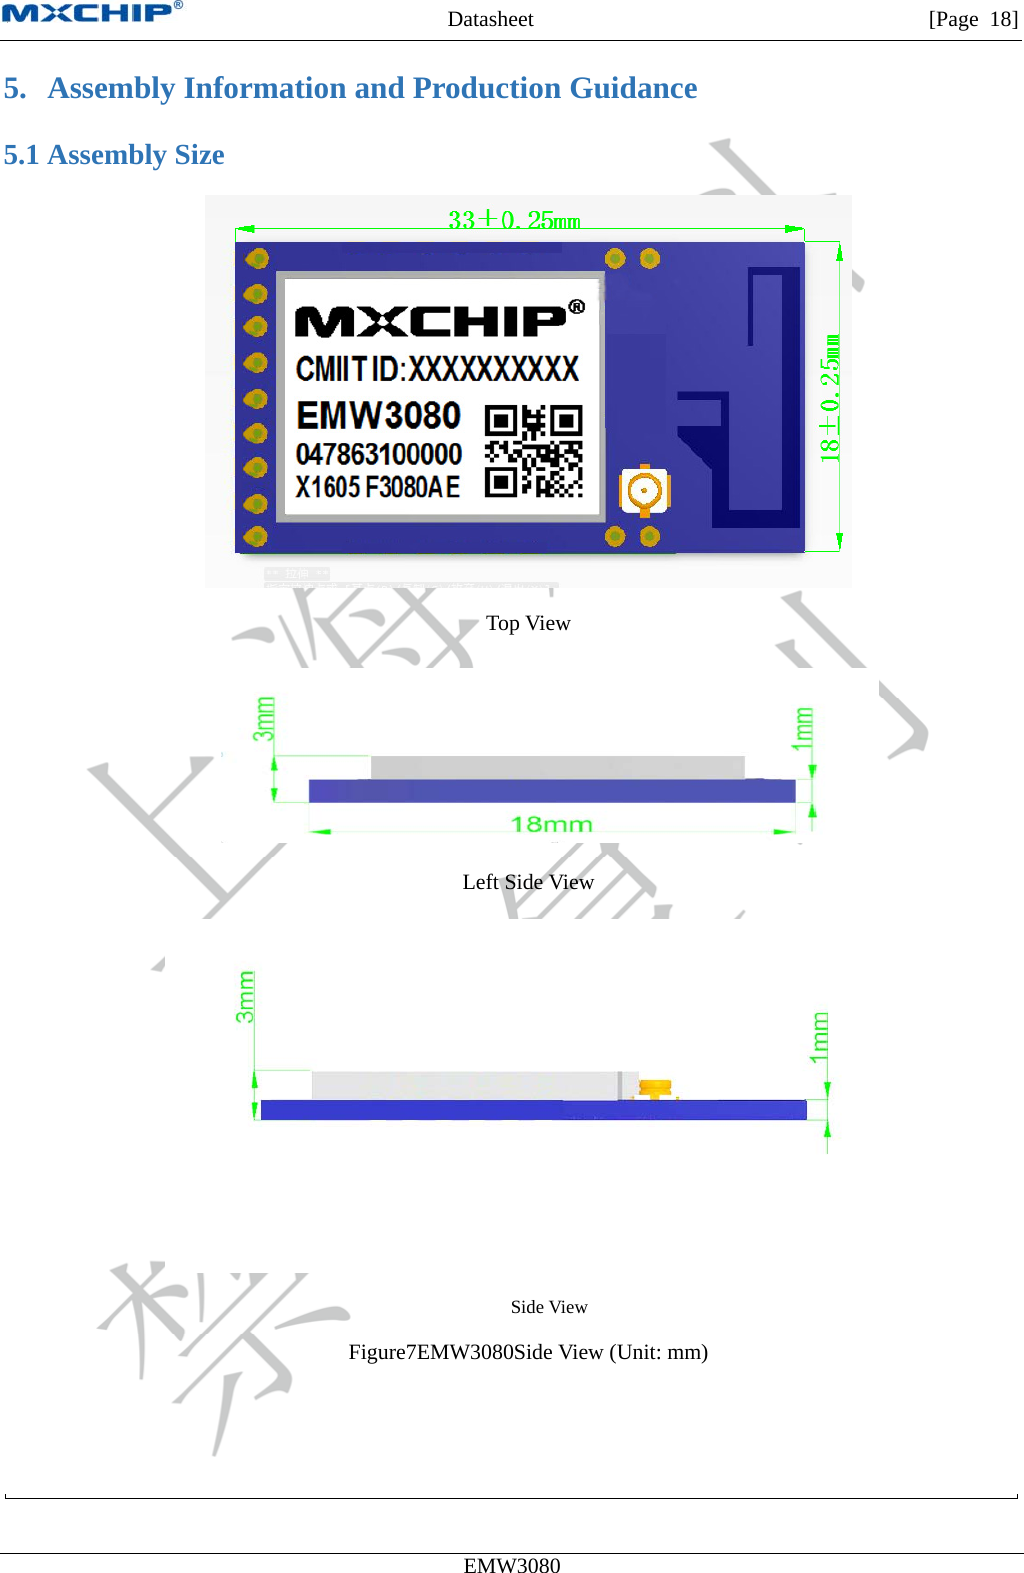 MXCHIP All Rights Reserved无法显示图像。计算机可能没有足够的内存以打开该图像，也可能是该图像已损坏。请重新启动计算机，然后重新打开该文件。如果仍然显示红色“x”，则可能需要删除该图像，然后重新将其插入。Datasheet         [Page 18] EMW3080  5. Assembly Information and Production Guidance 5.1 Assembly Size  Top View  Left Side View  Side View Figure7EMW3080Side View (Unit: mm)  